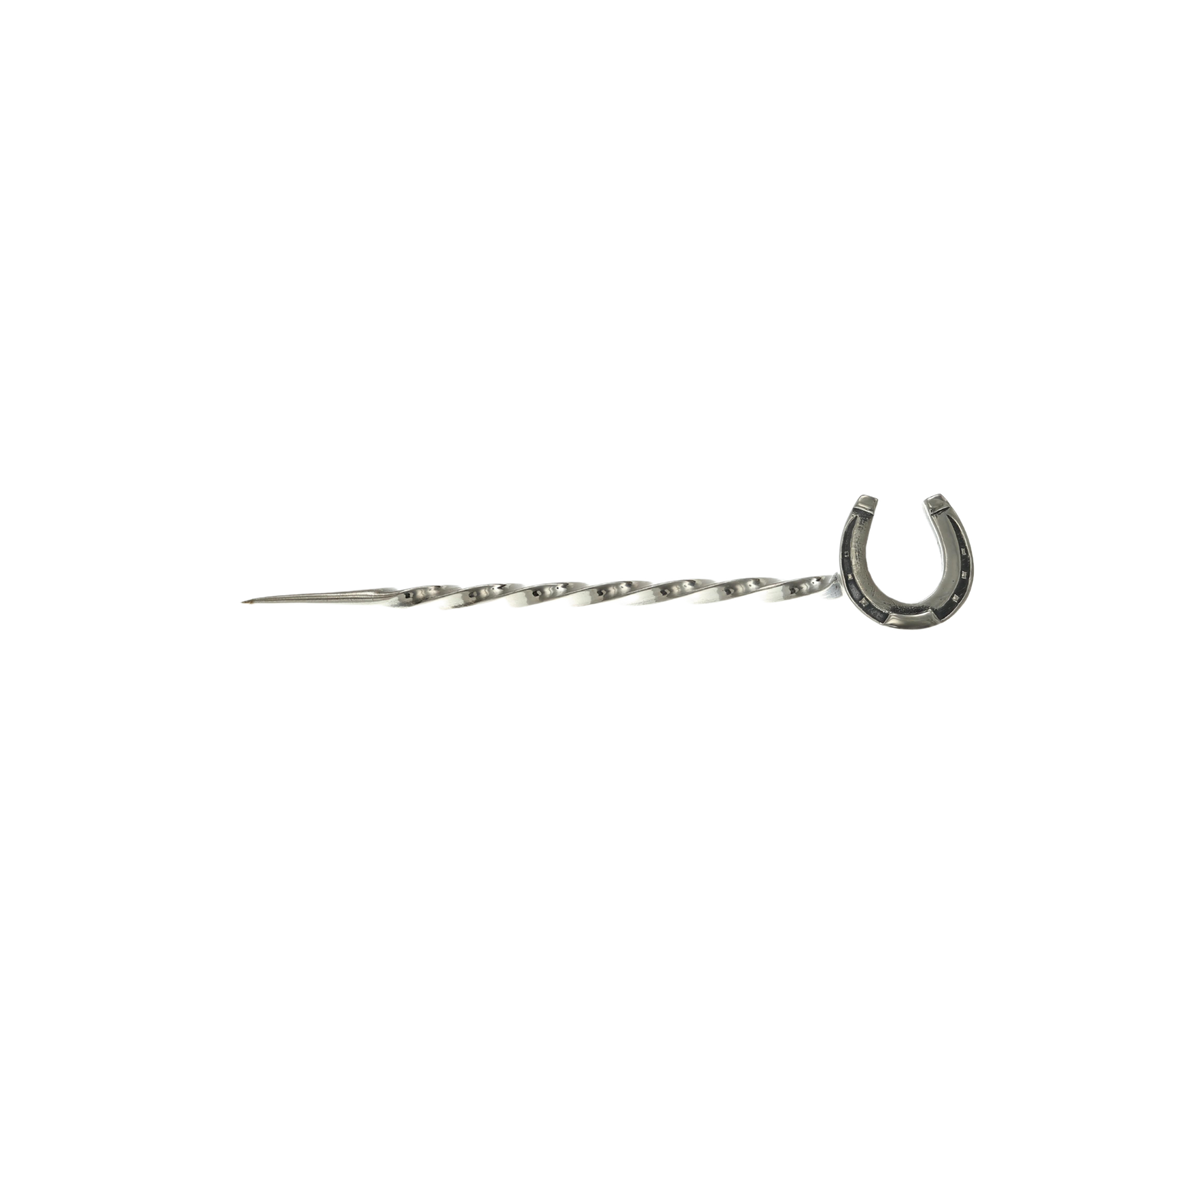 Toothpick 2077 Sterling Silver Horseshoe